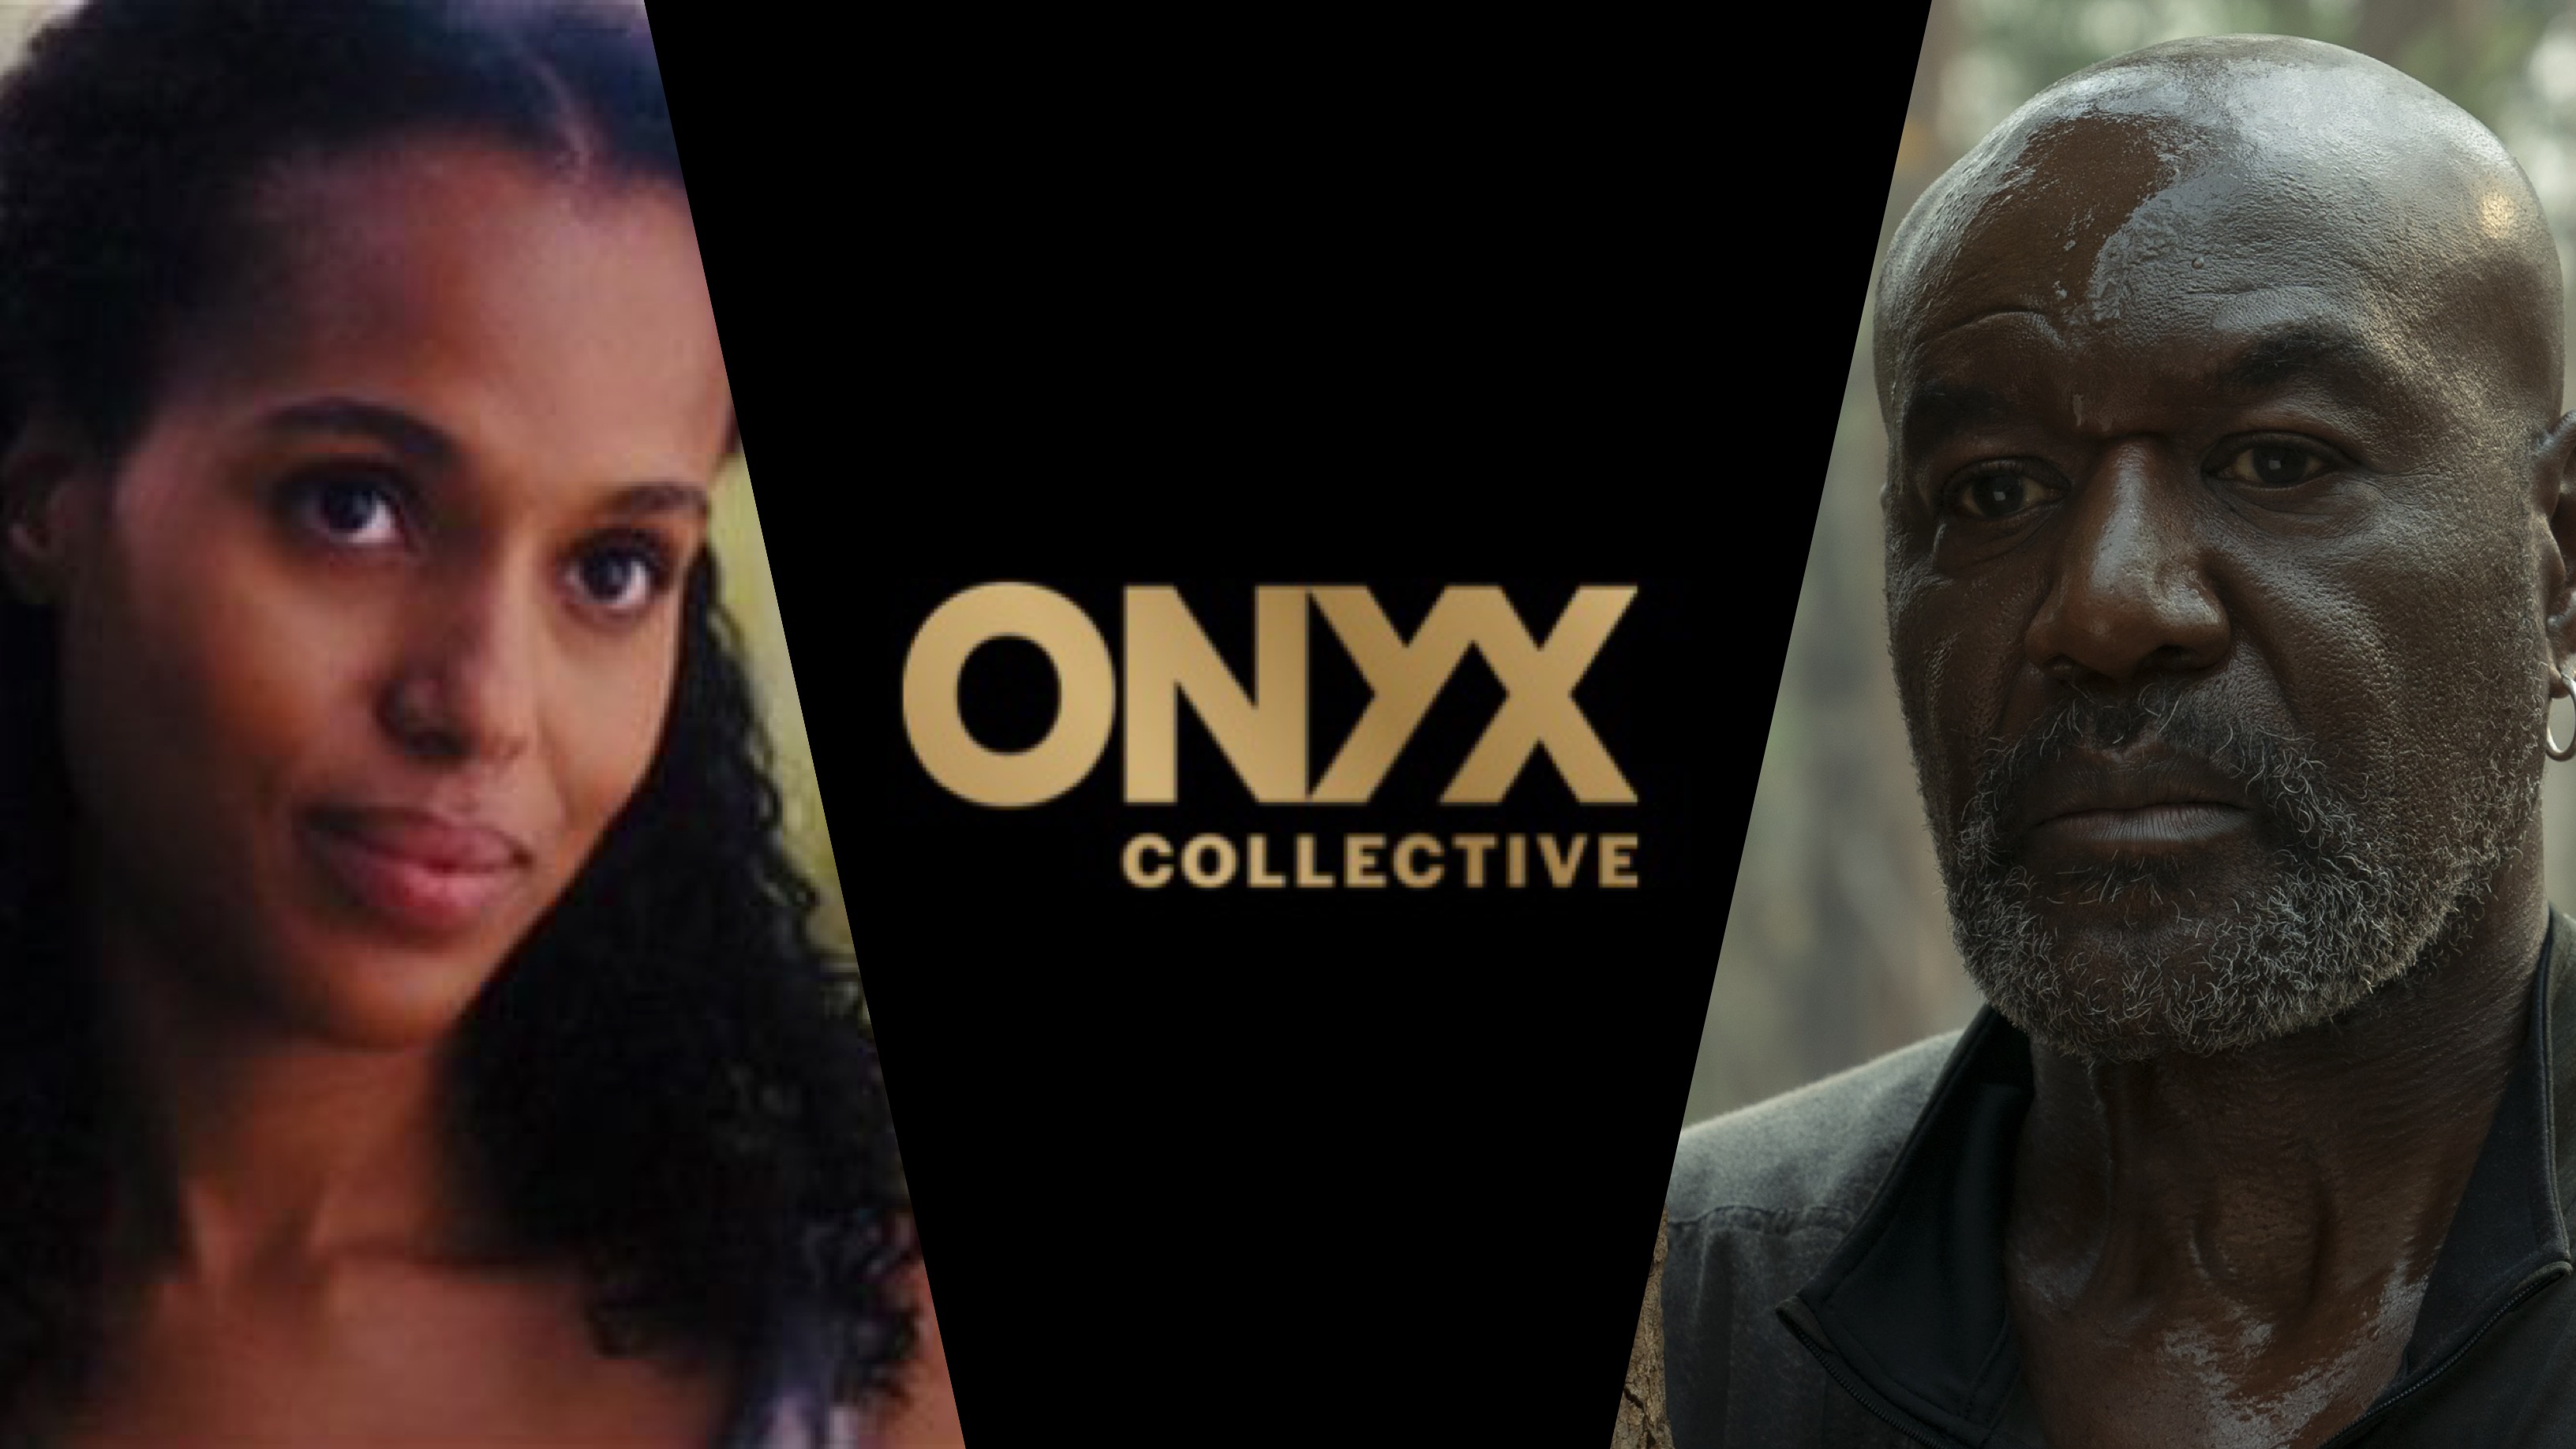 Kerry Washington and Delroy Lindo to Lead Hulu Series ‘Unprisoned’